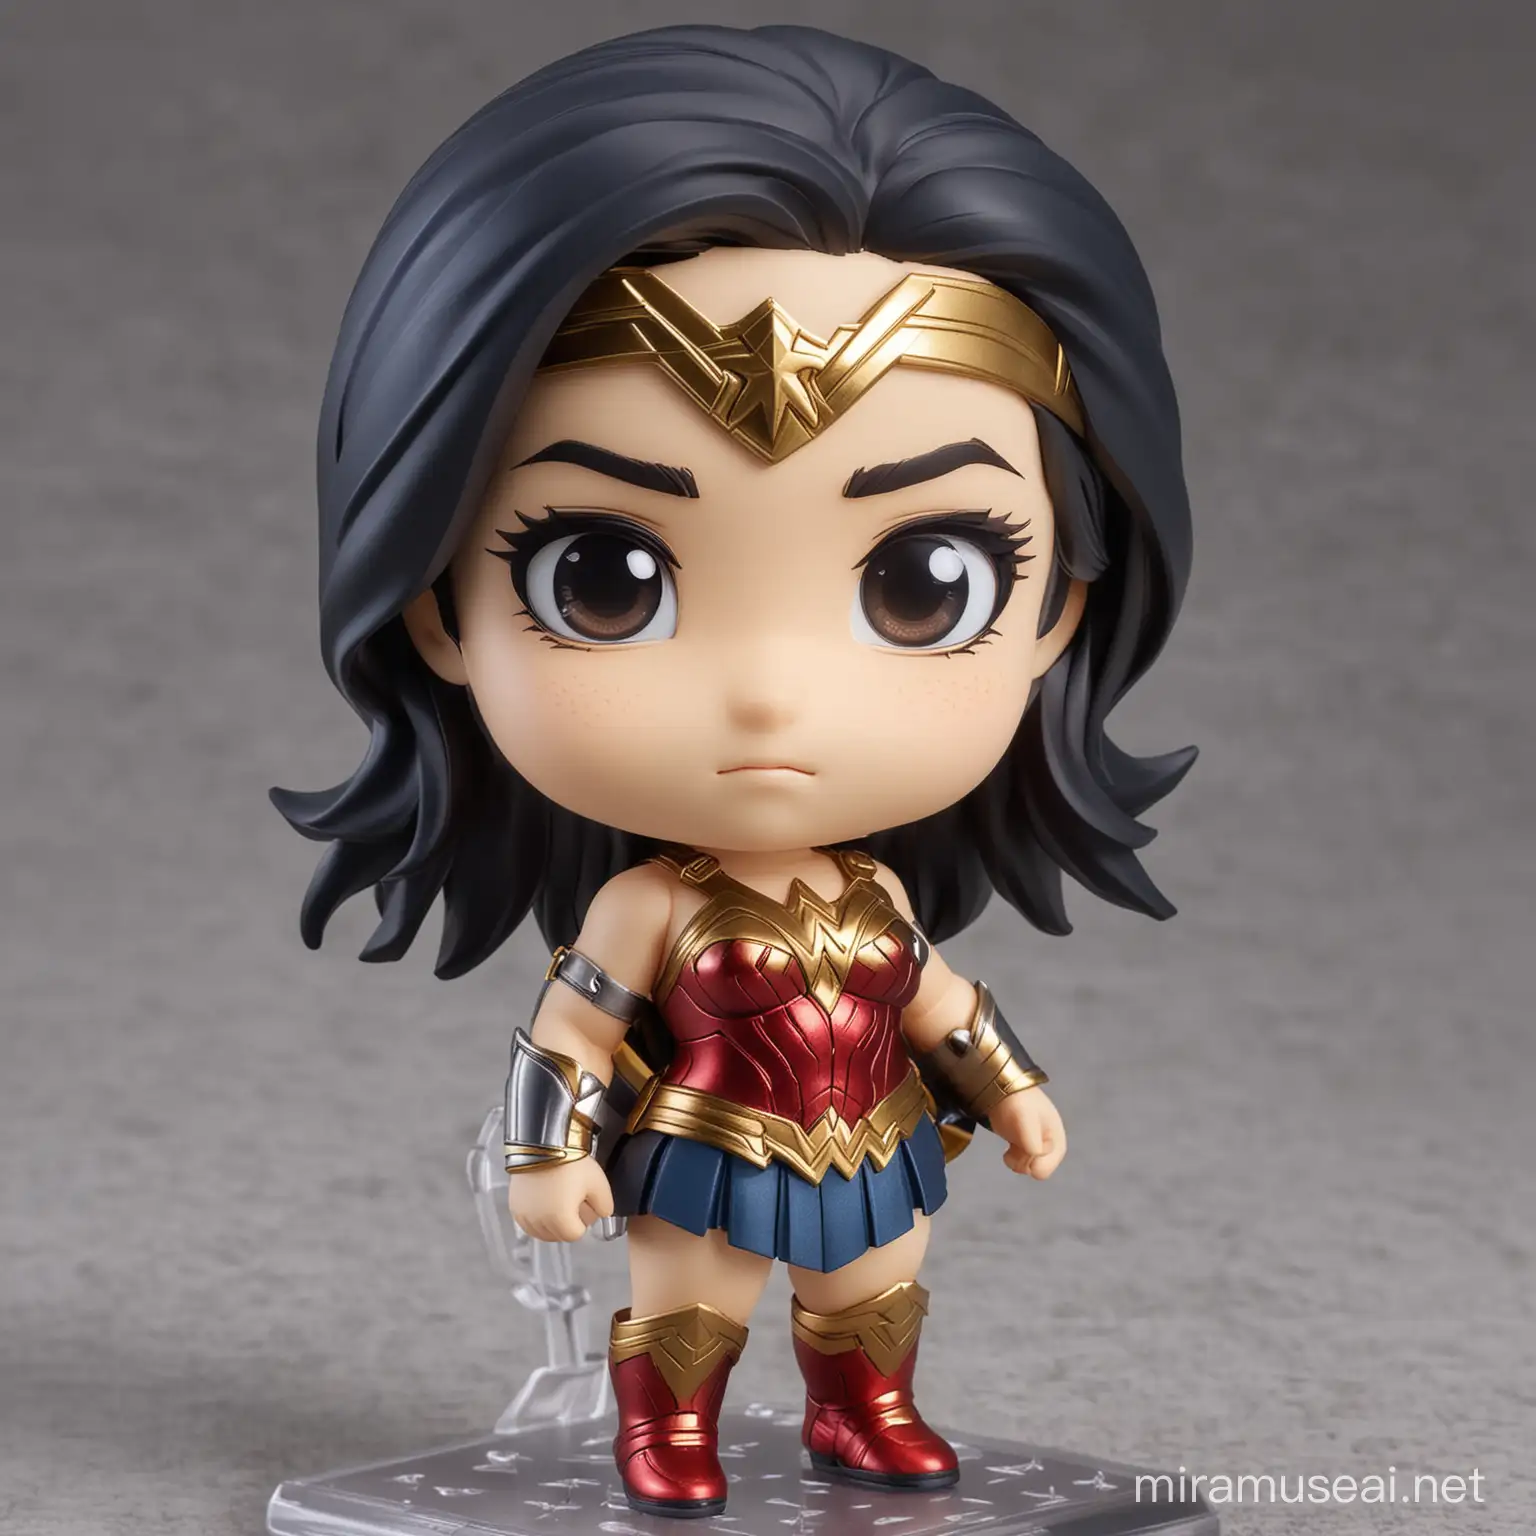 Create a Chibi (Nendoroid) version of the character wonder woman without bugged or duplicated defective body parts